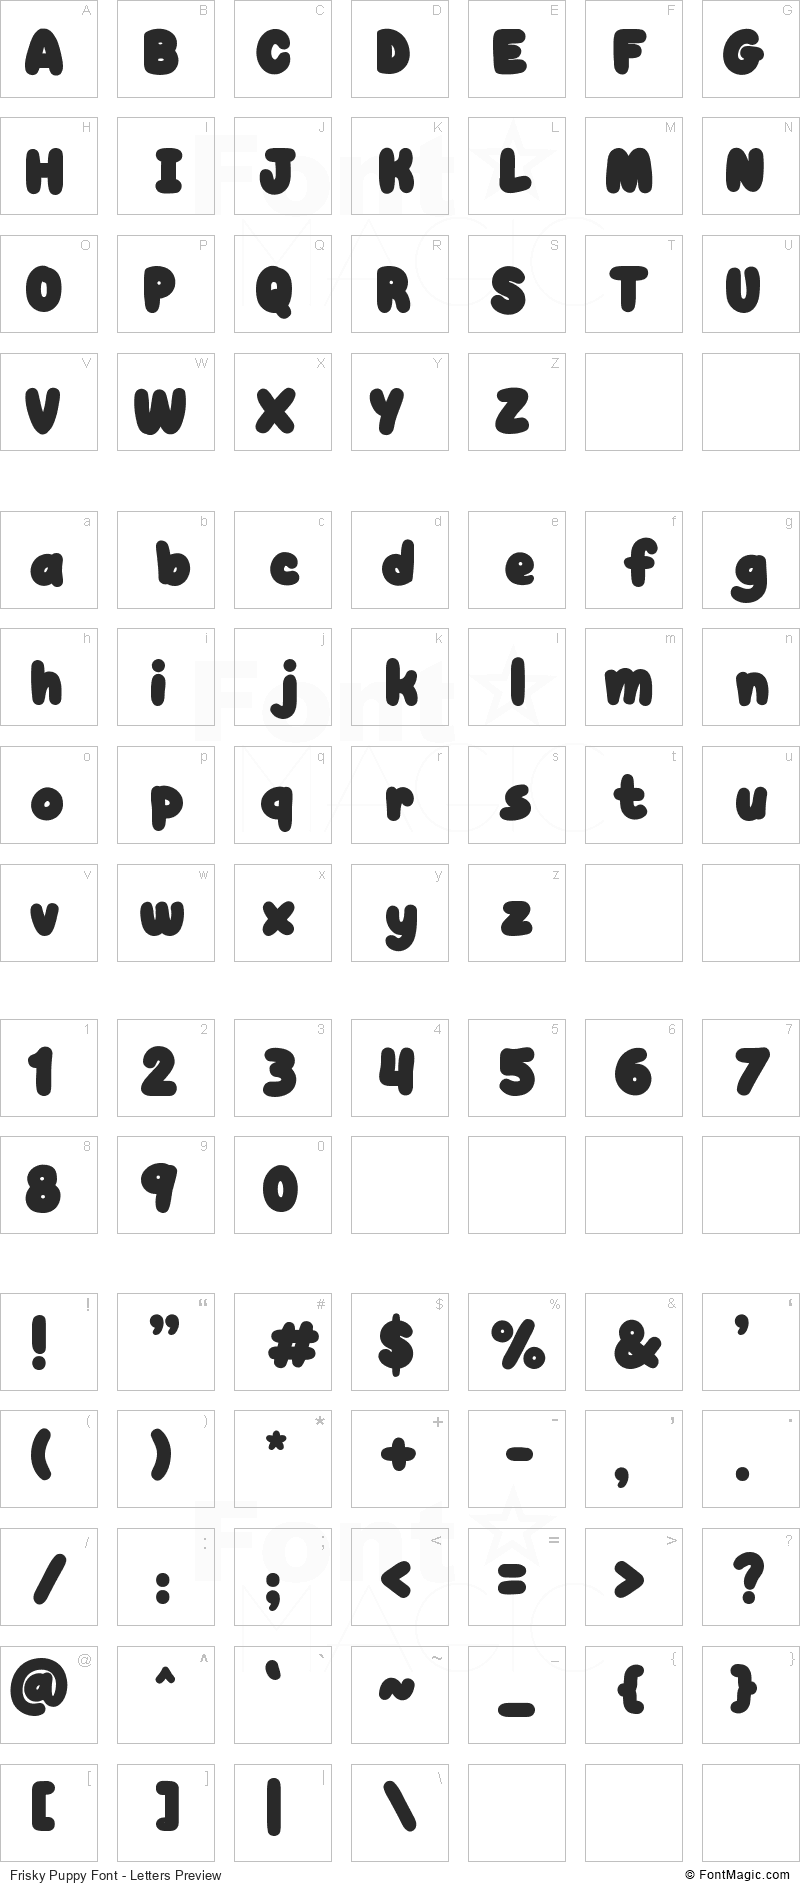 Frisky Puppy Font - All Latters Preview Chart